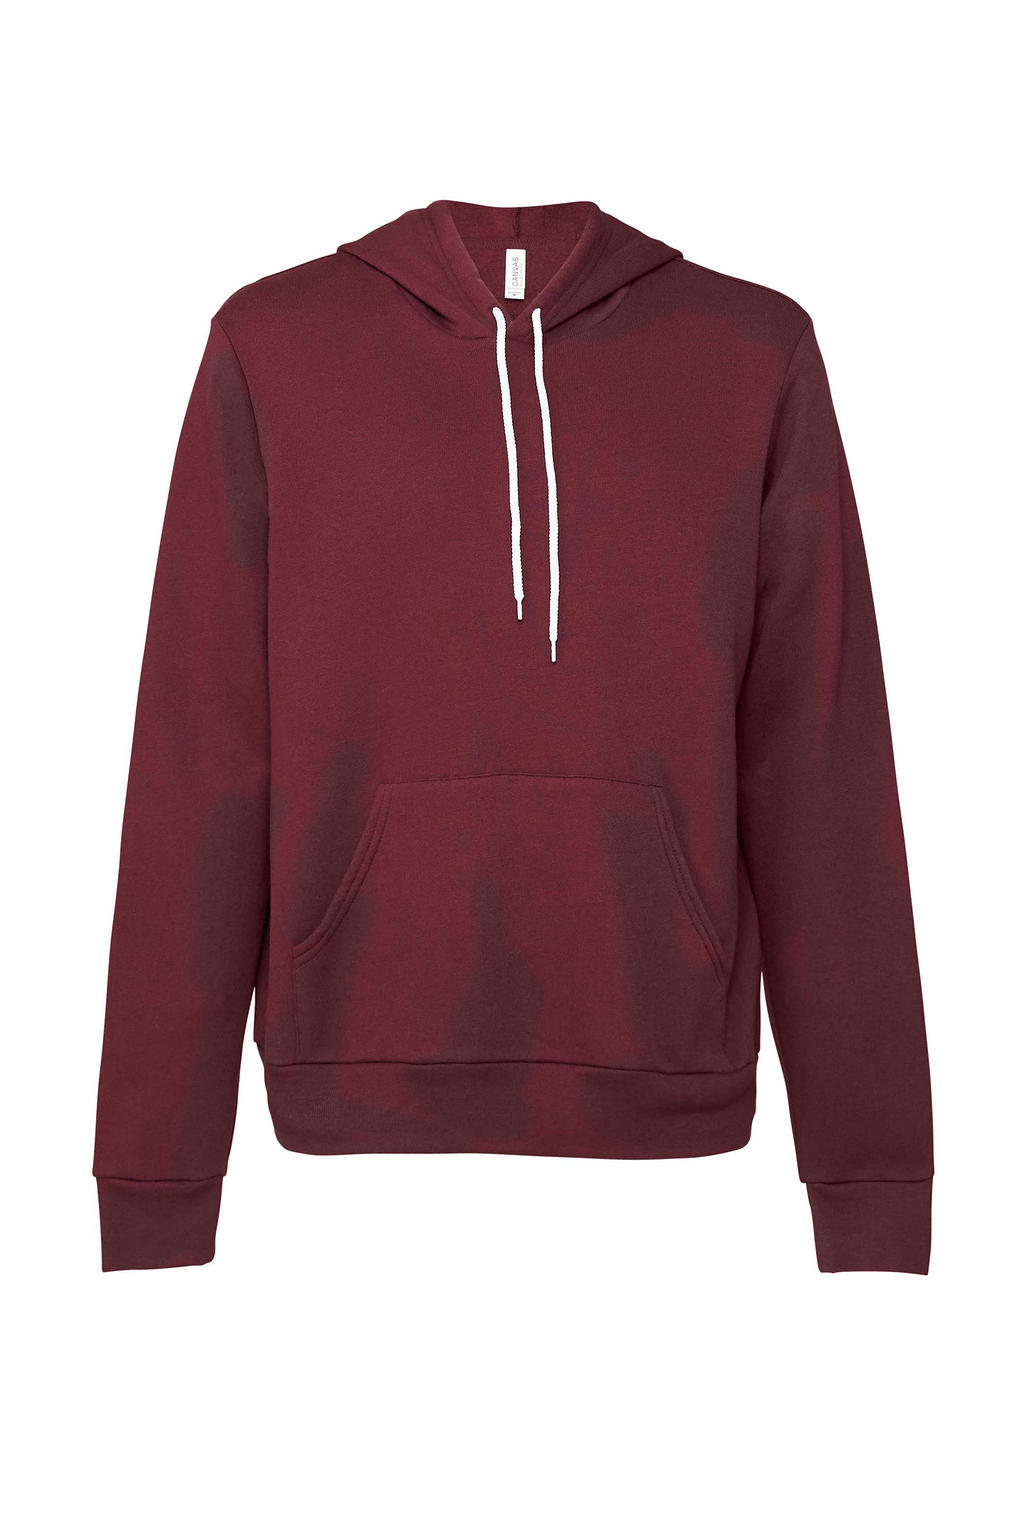  Unisex Poly-Cotton Pullover Hoodie in Farbe Maroon